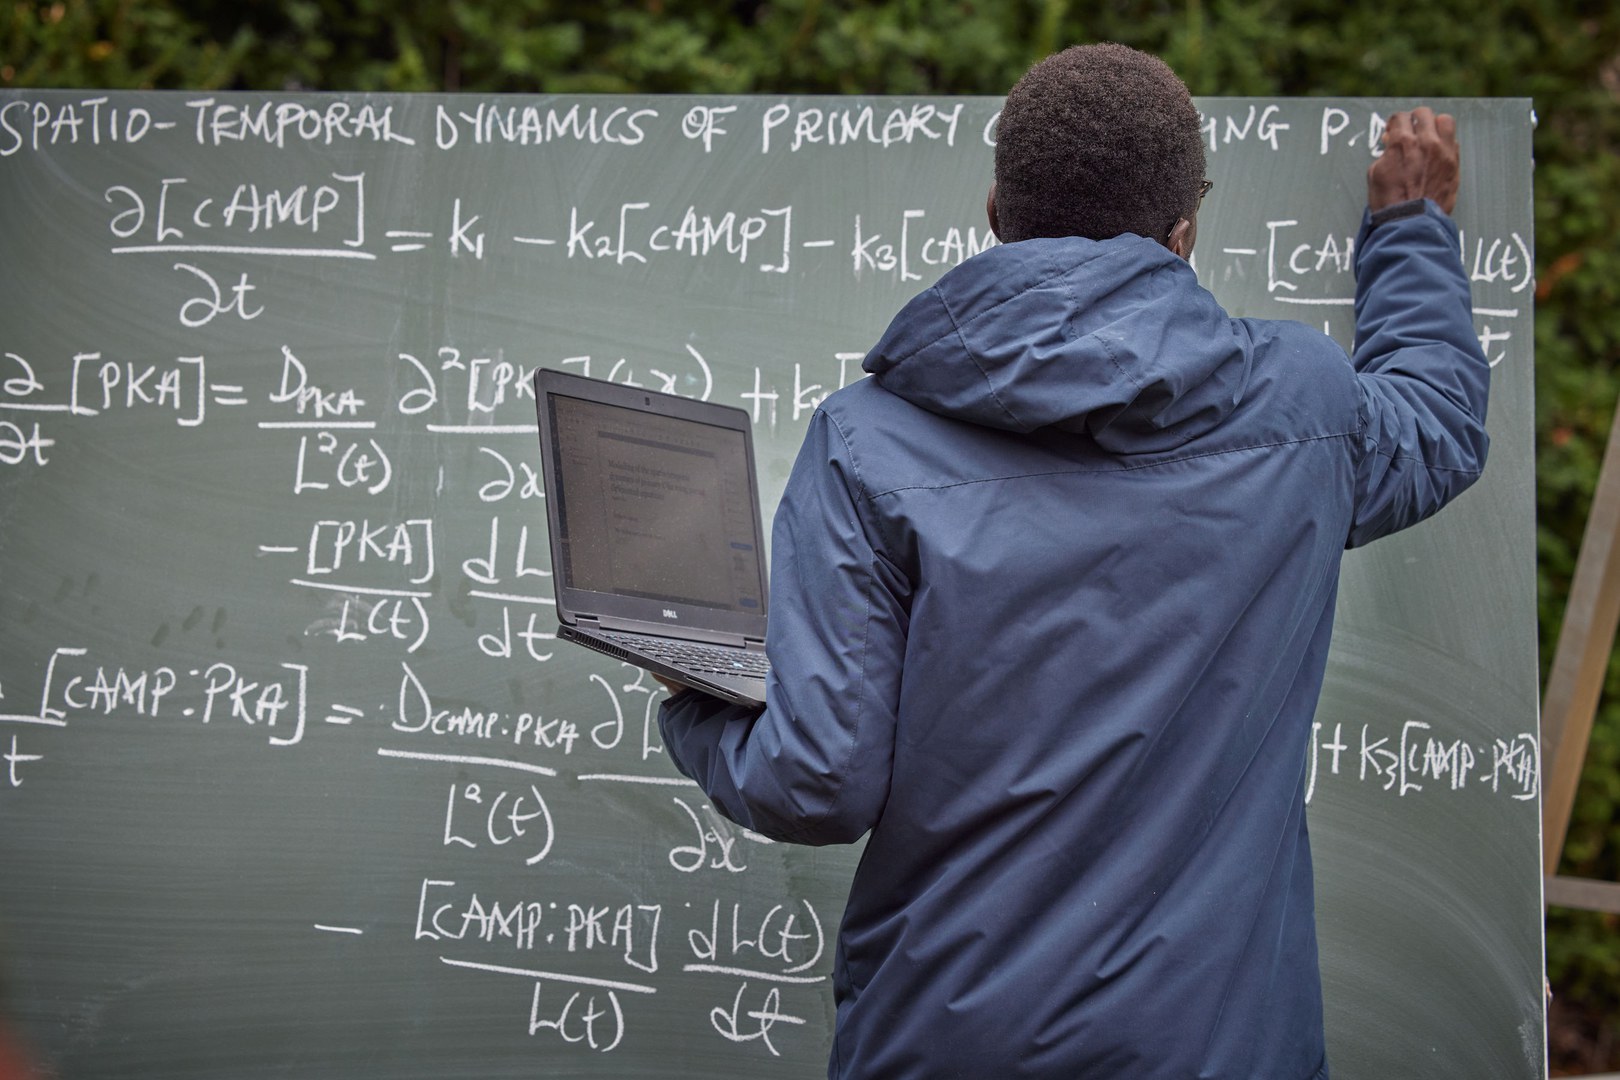 Visiting scientist Sefah Frimpong at one of the boards outside the Hausdorff Center for Mathematics building